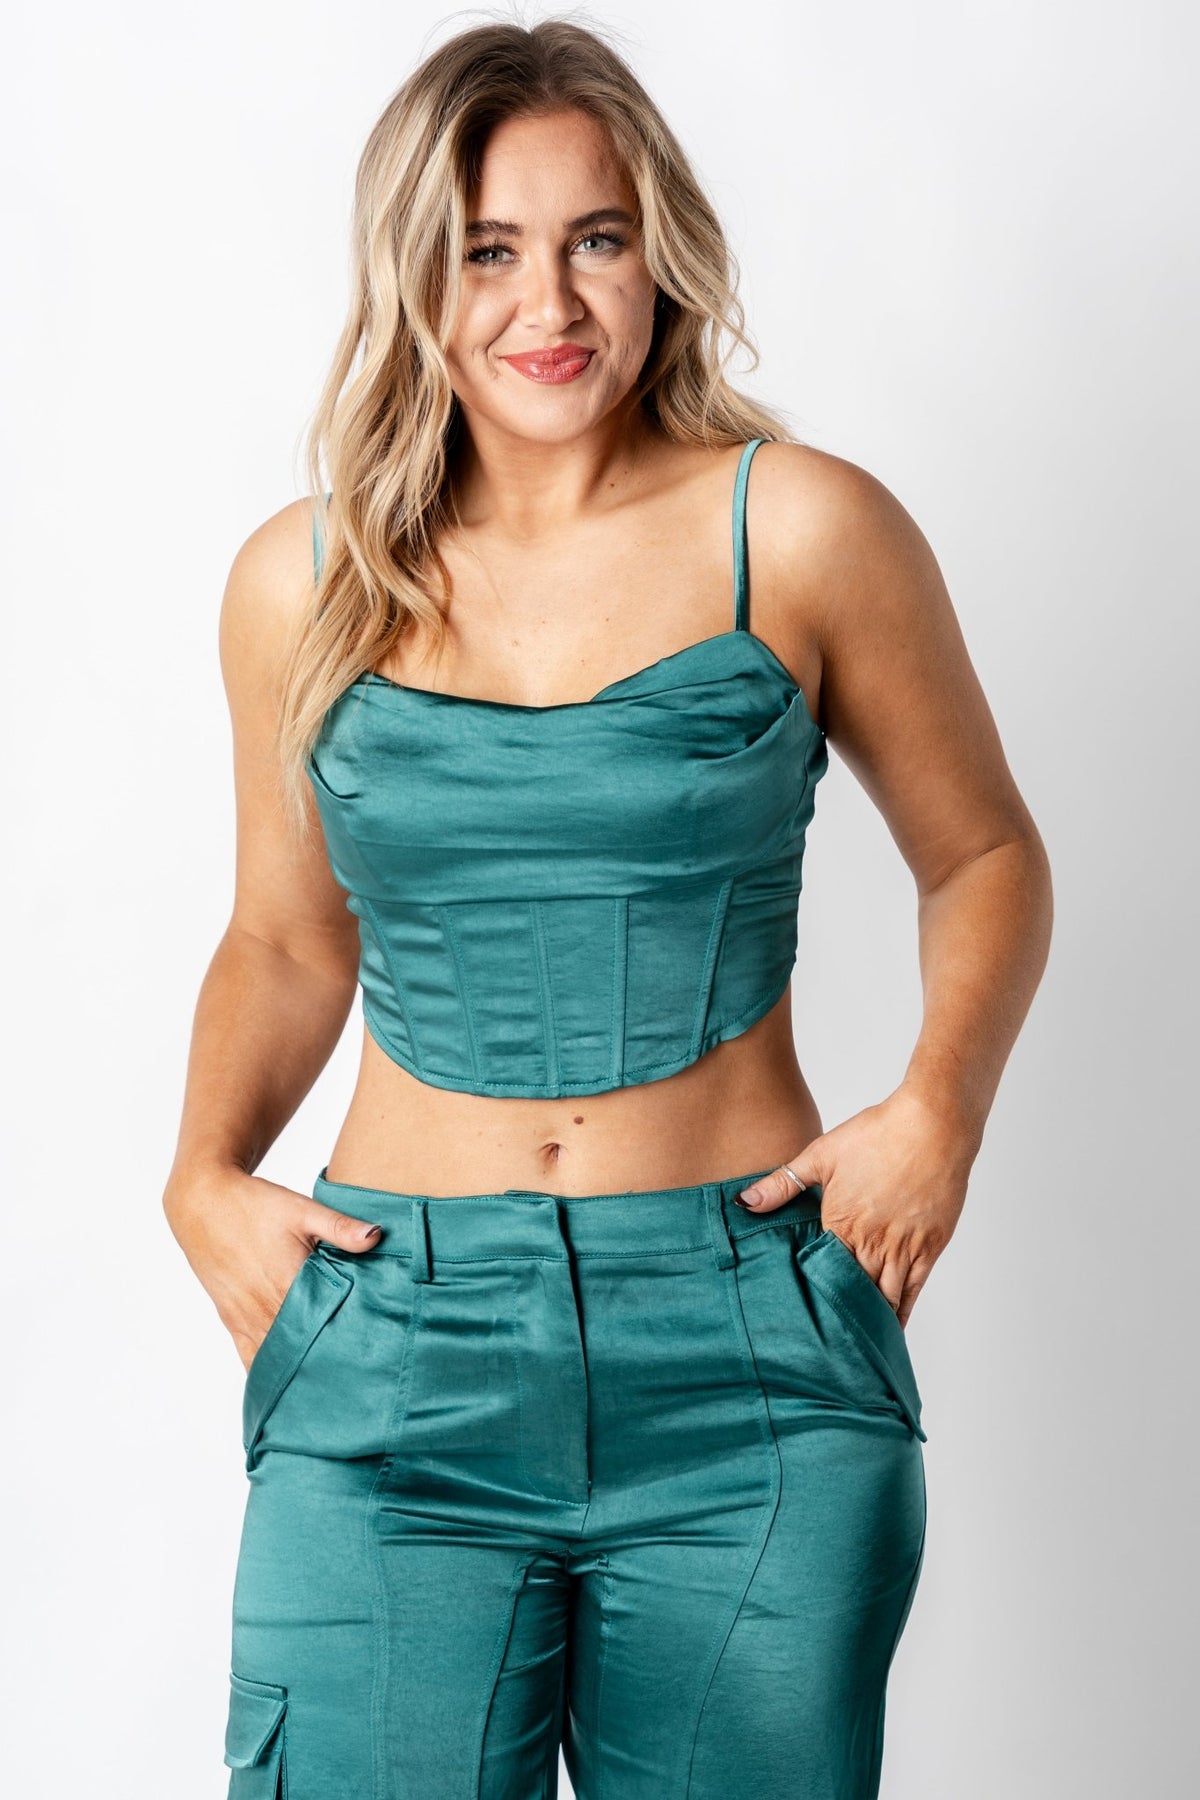 Satin corset top forest green - Trendy Holiday Apparel at Lush Fashion Lounge Boutique in Oklahoma City